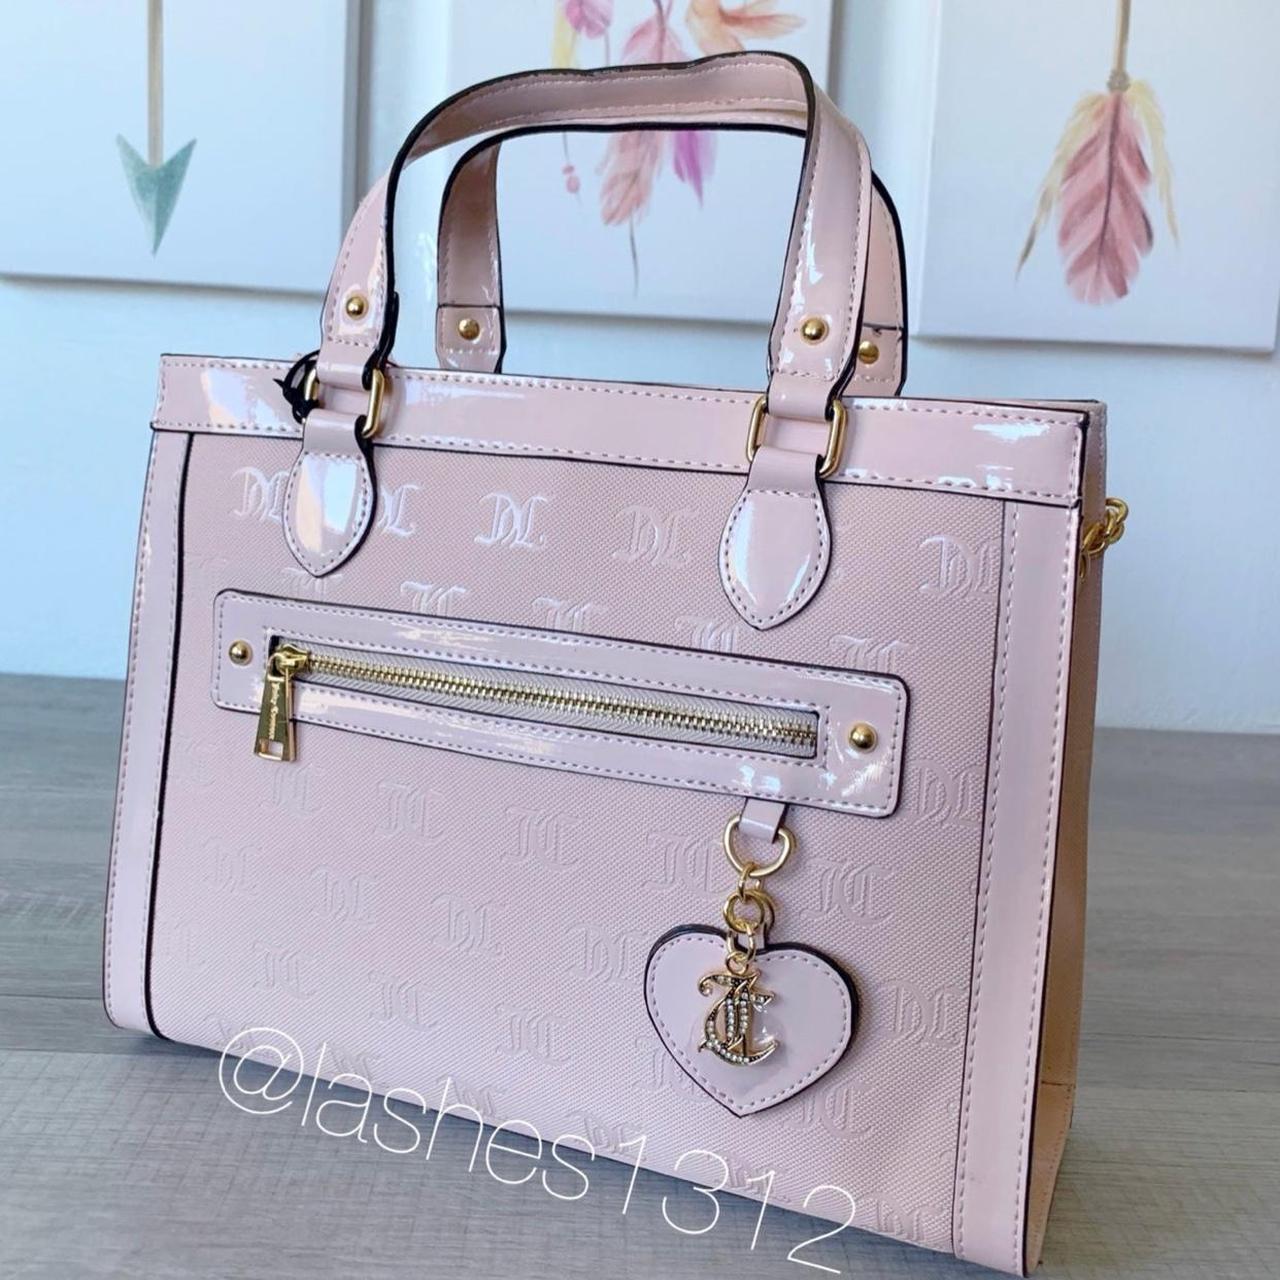 Juicy Couture Nailed It Tote, - Shiny pink patent